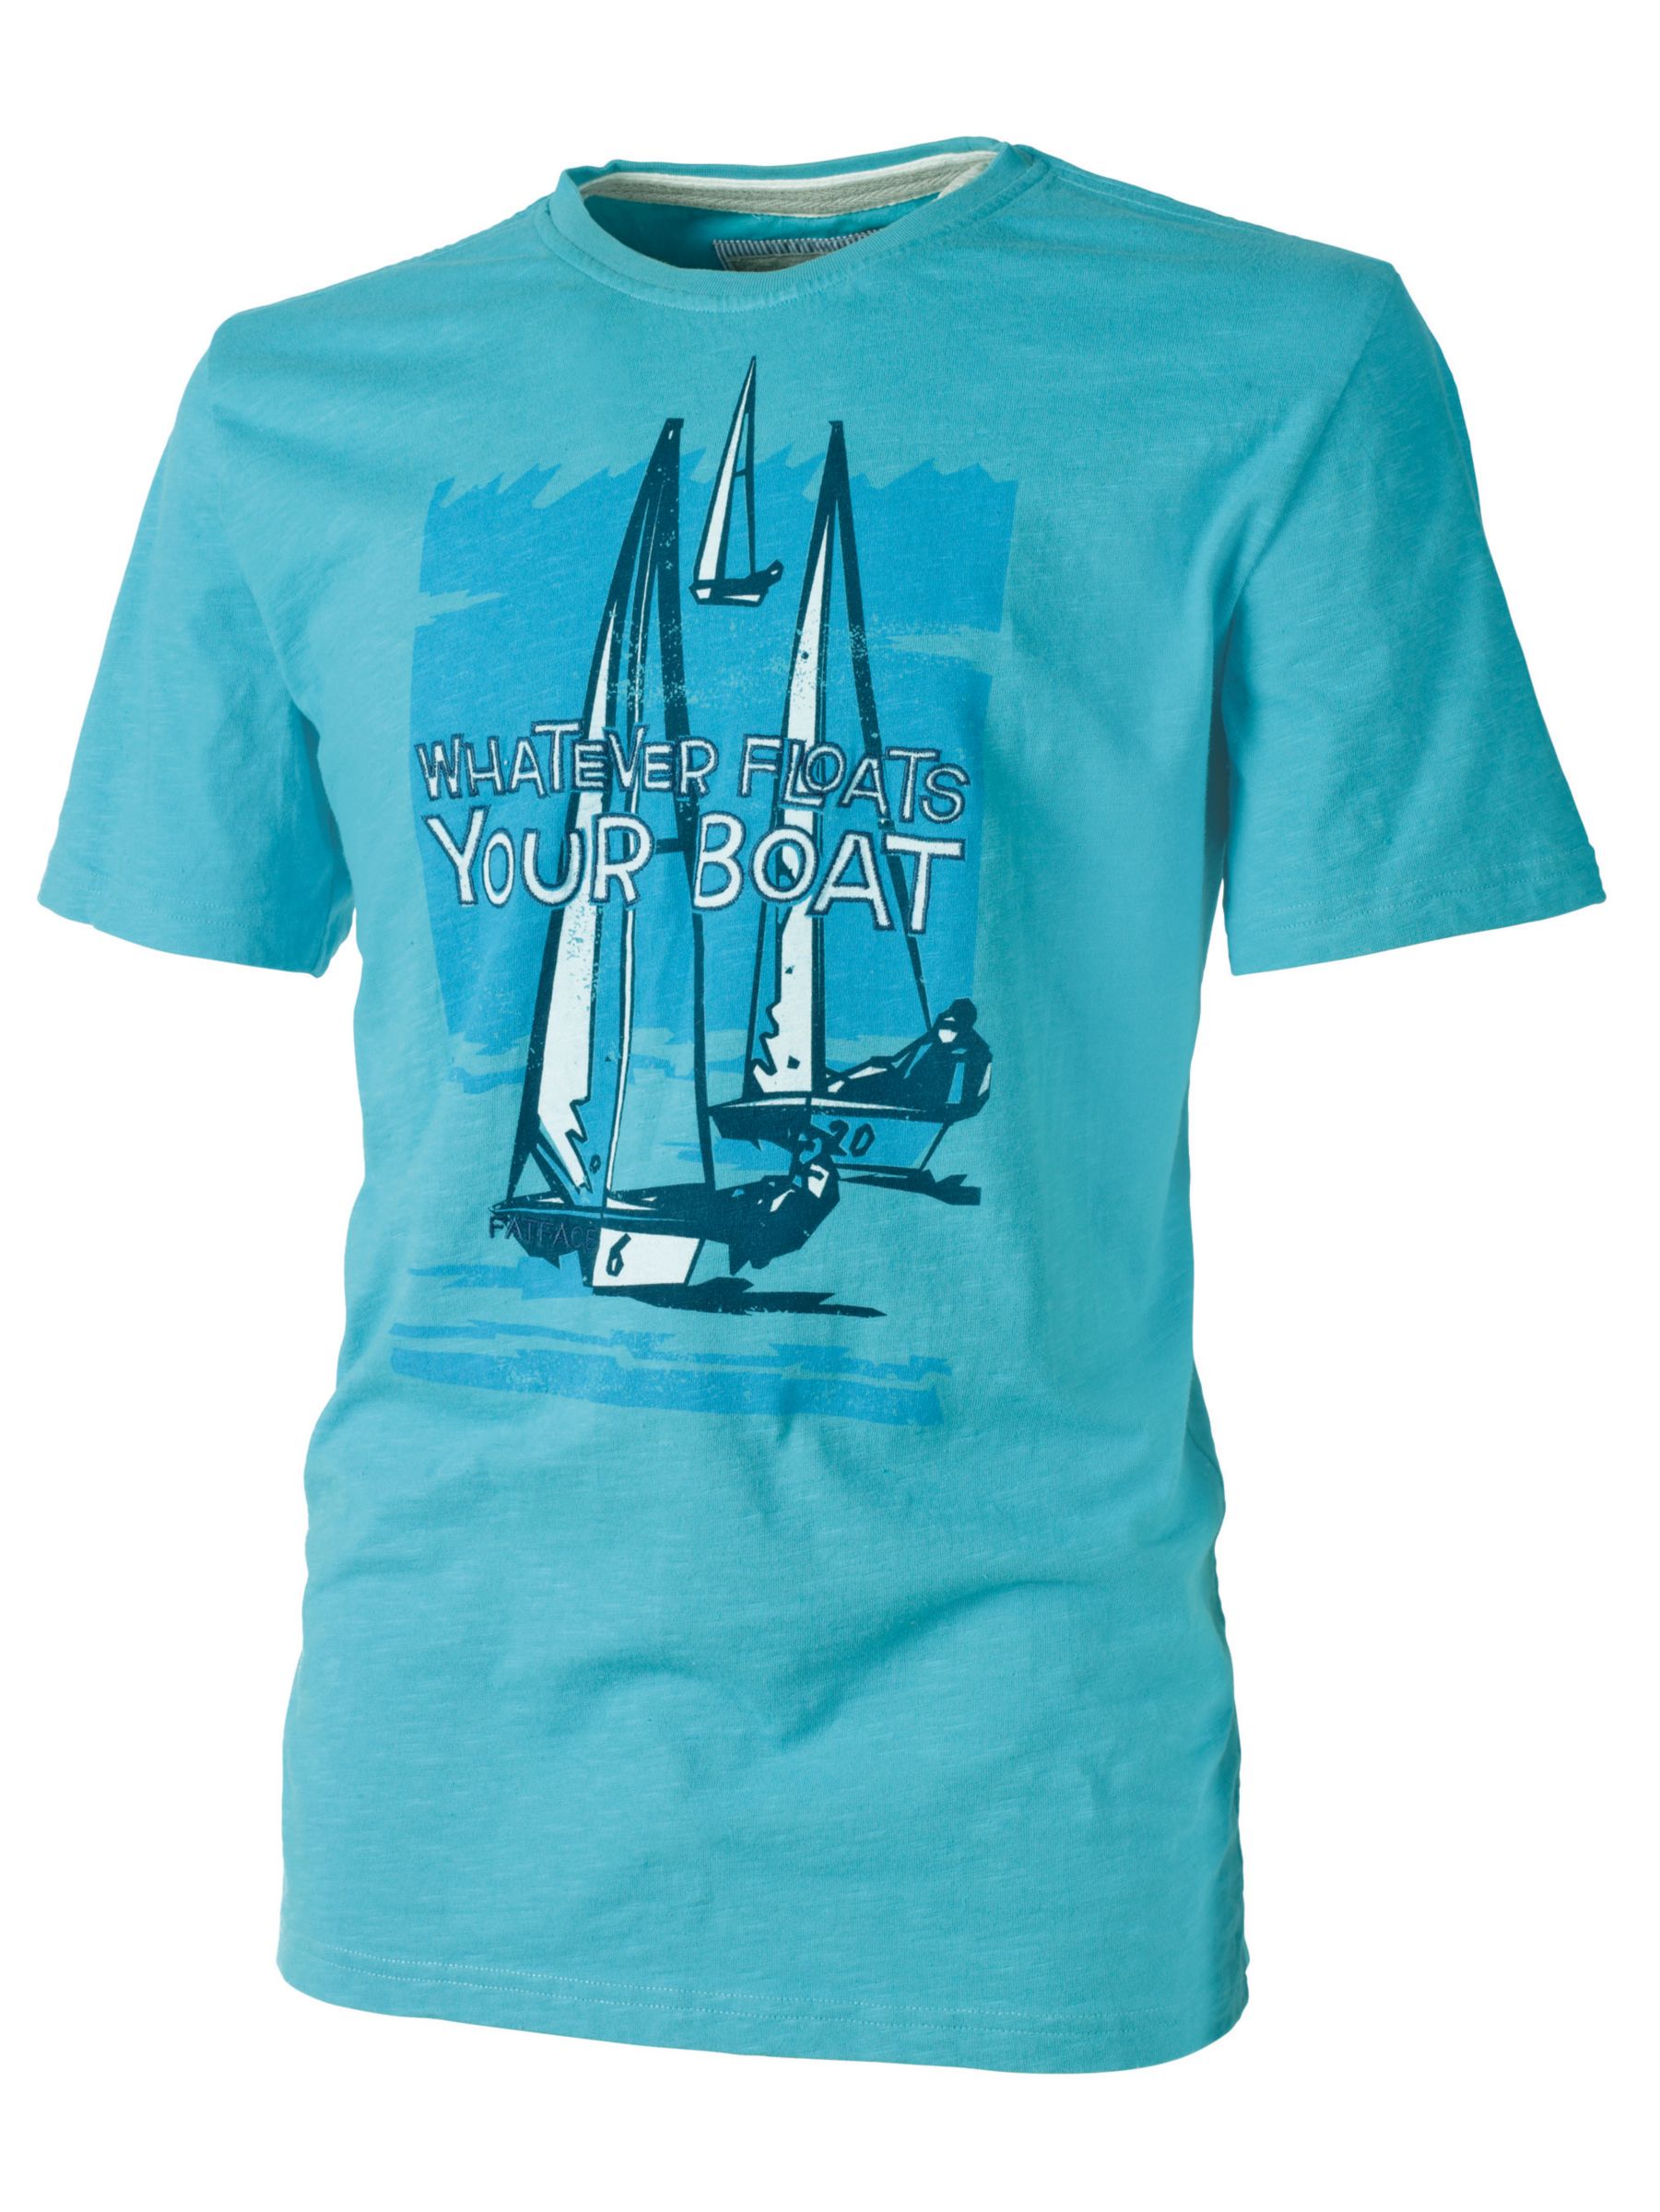 Fat Face Whatever Floats Your Boat T-Shirt,